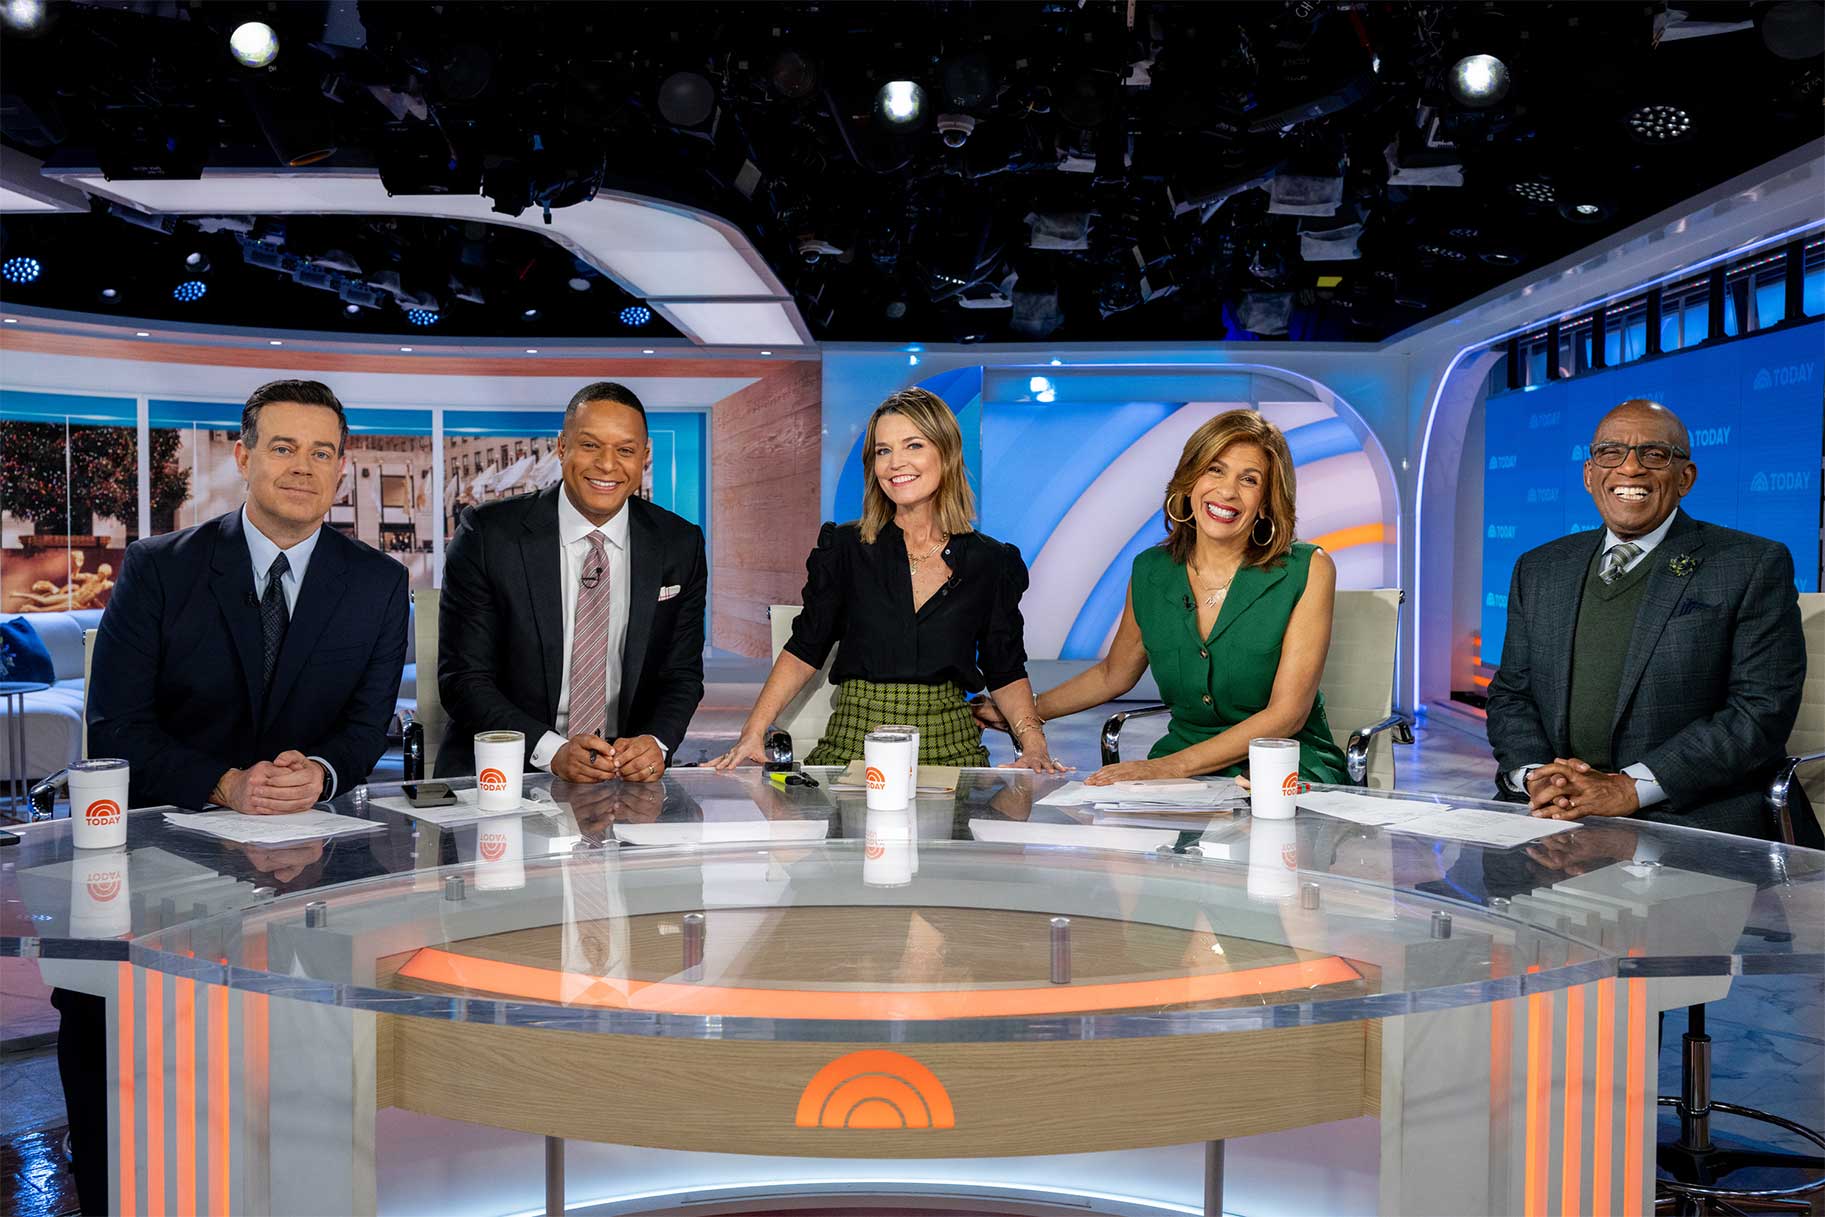 The Complete Cast Of The TODAY Show: Every Host and Anchor